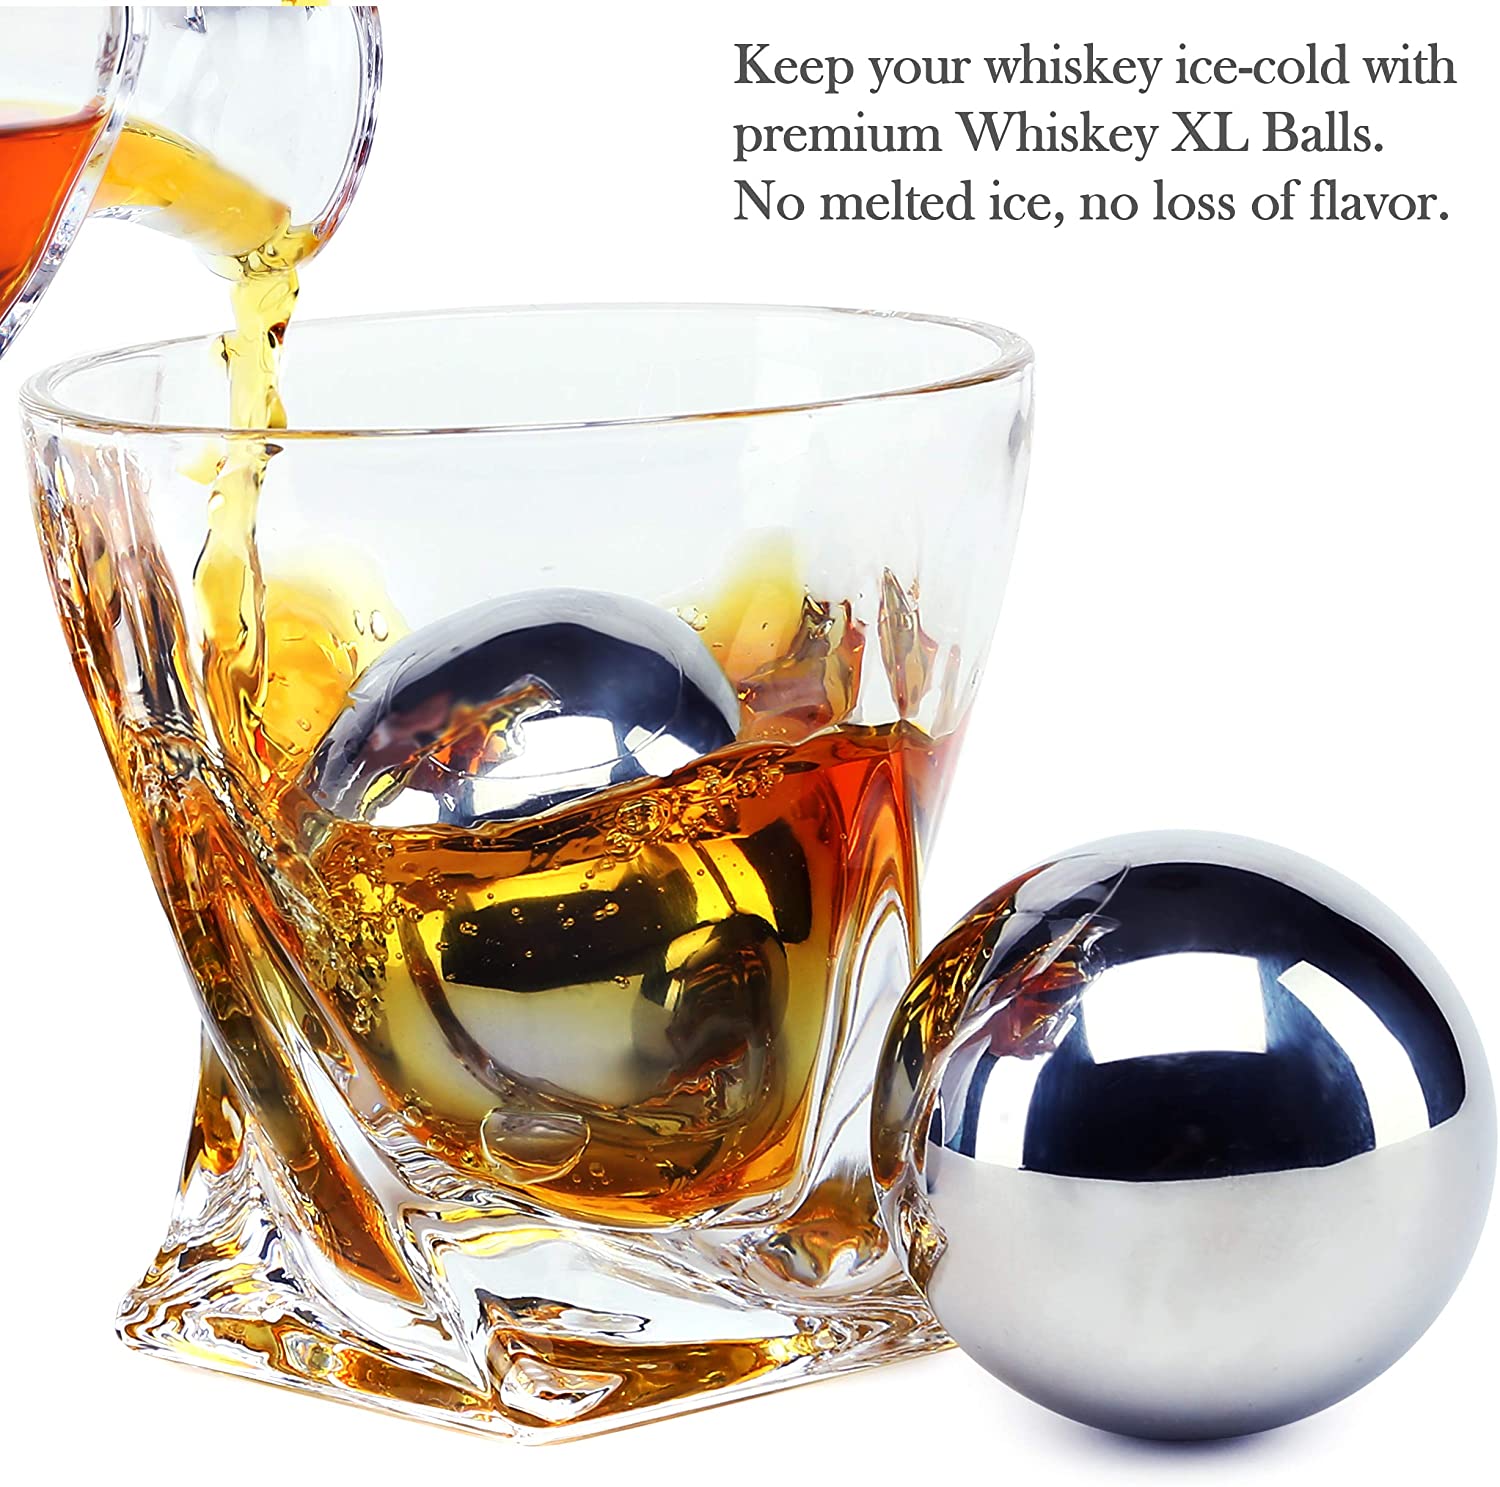 2 Pcs Large Round Whiskey Stones Reusable Spherical Stainless